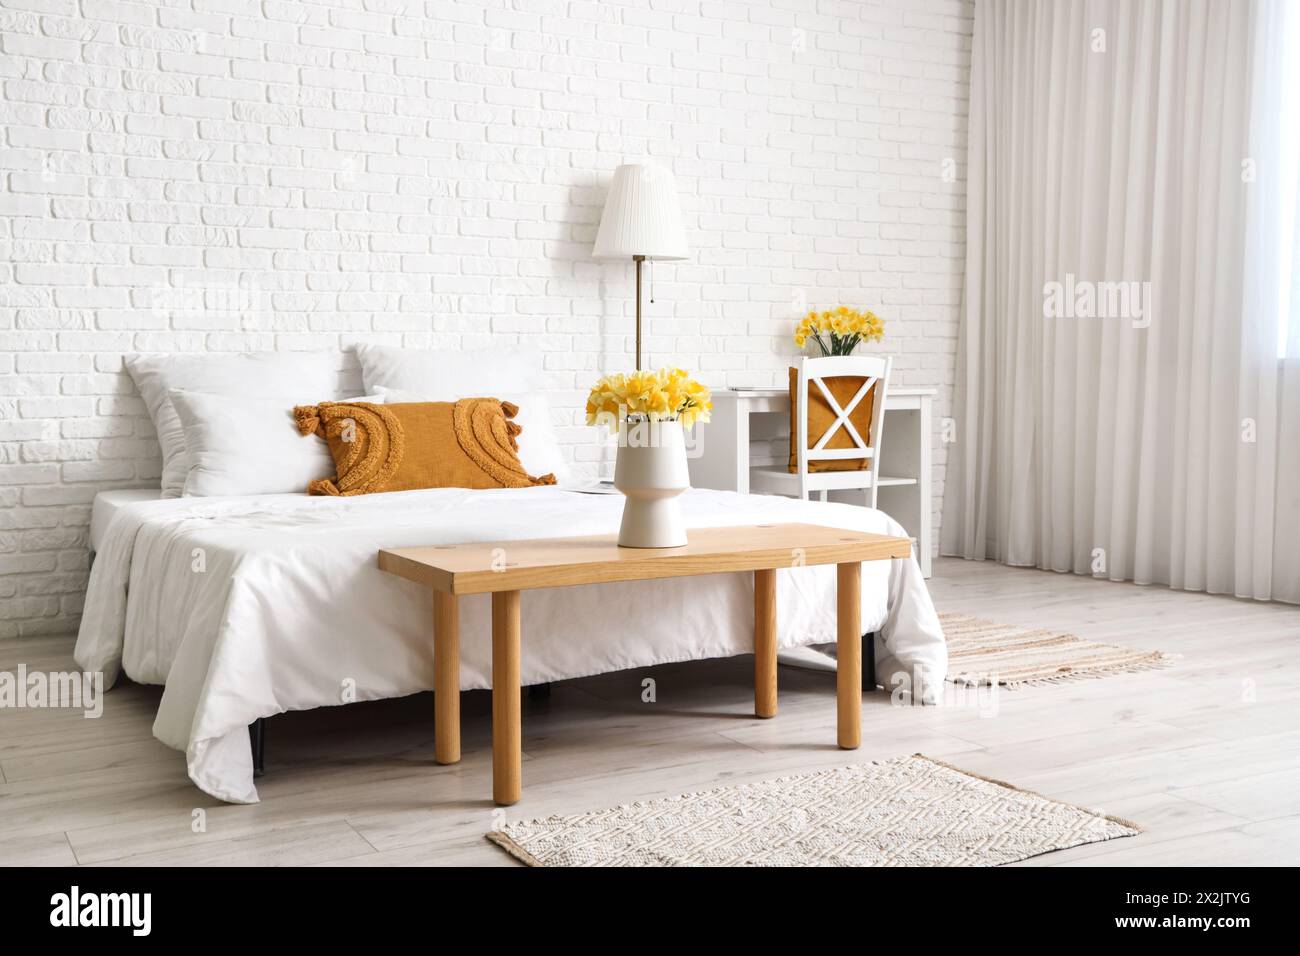 Vase with yellow narcissus flowers on bench near bed in white bedroom Stock Photo